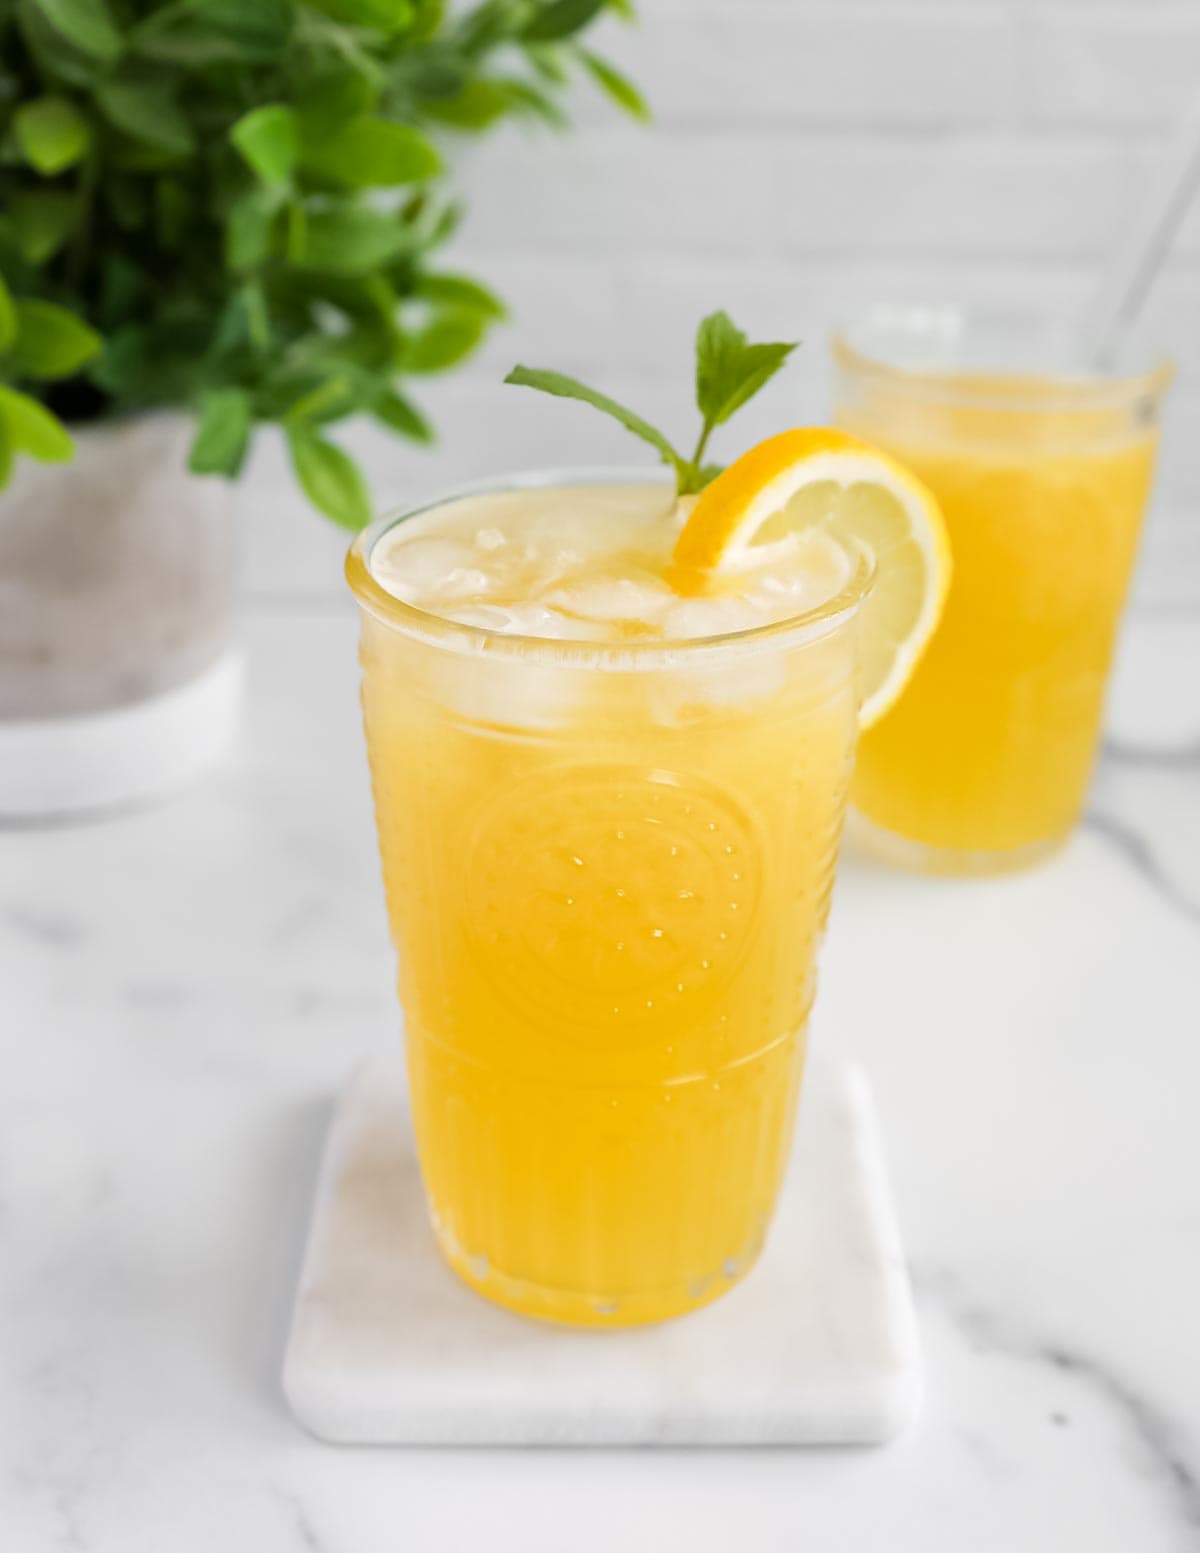 A clear glass filled with yellow lemonade